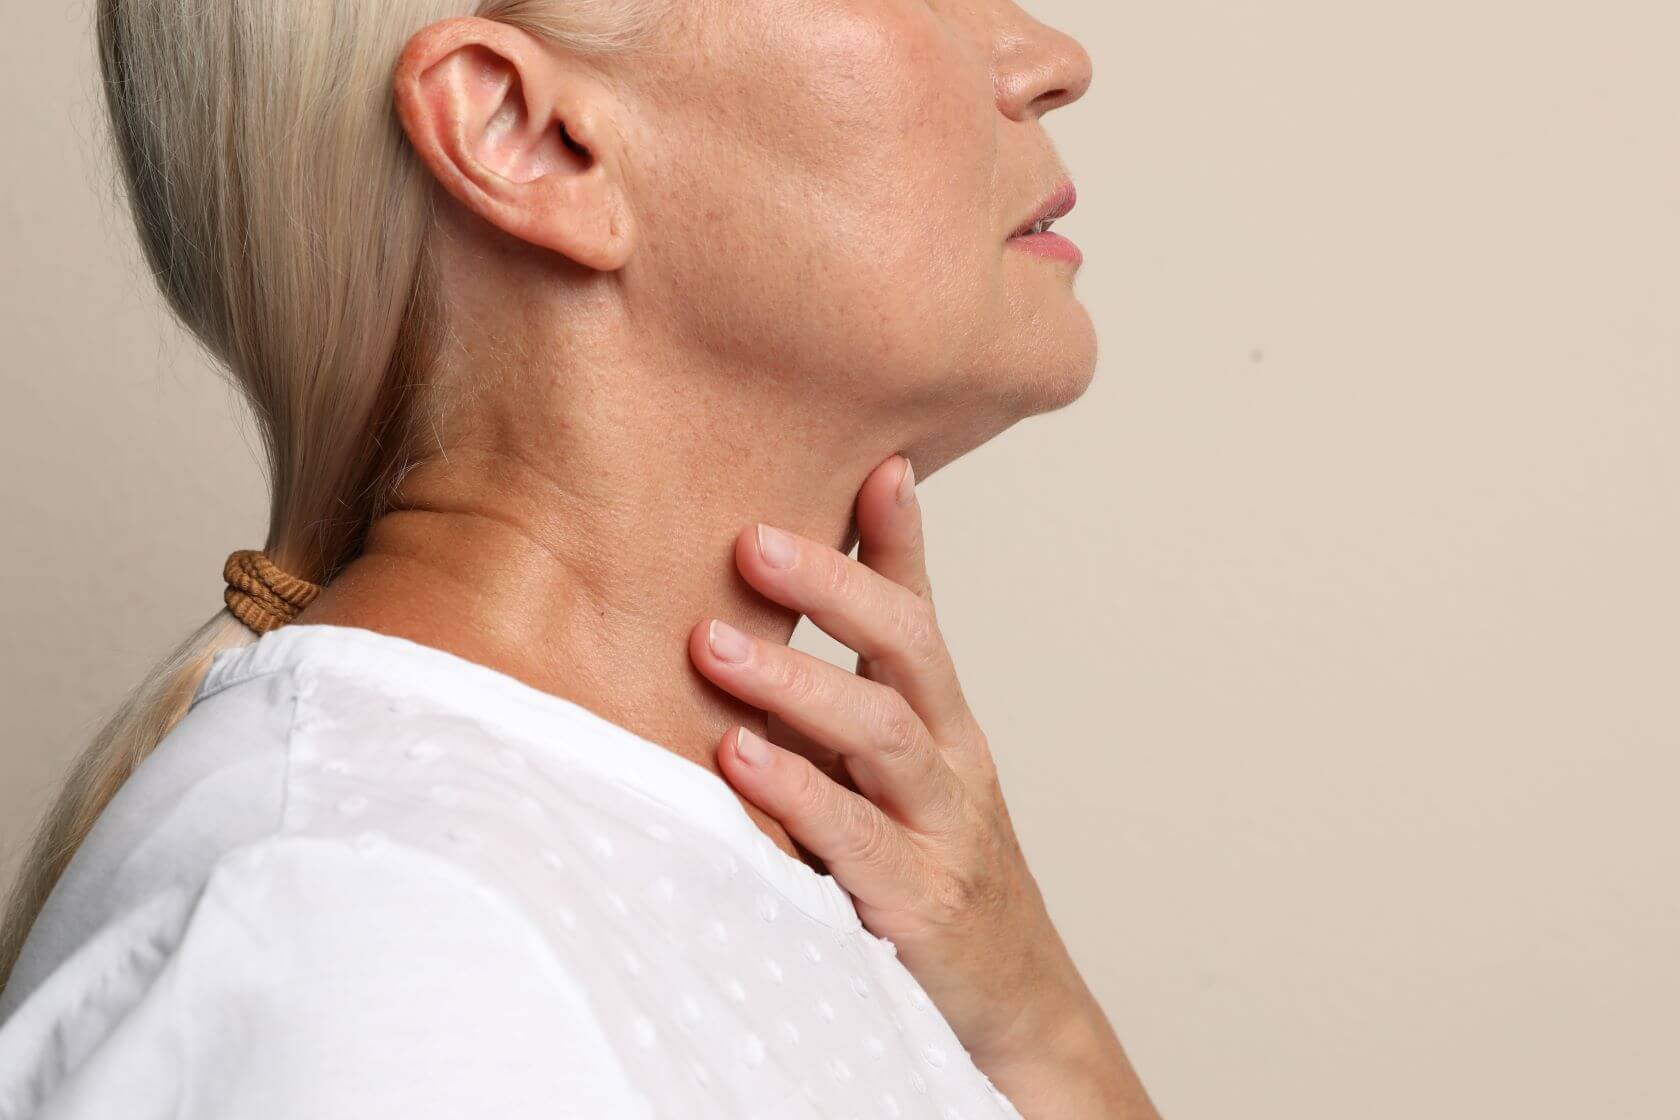 woman considers how to improve the appearance of an aging neck